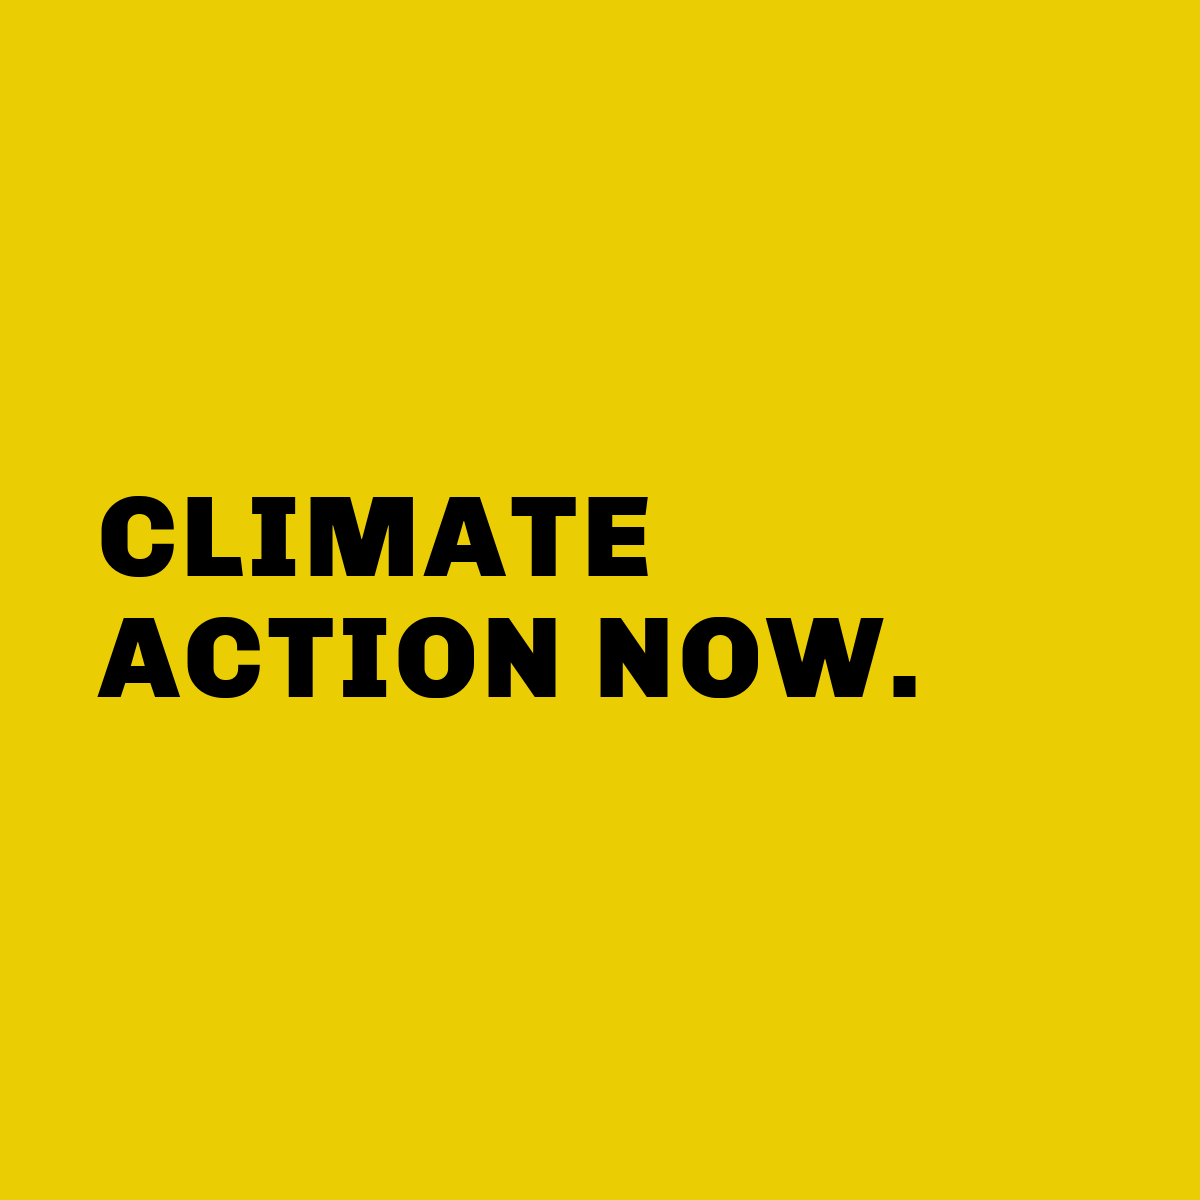 I stand with Democrats. It's time for bold action on the climate crisis - Biden's Infrastructure Deal would deliver. Image